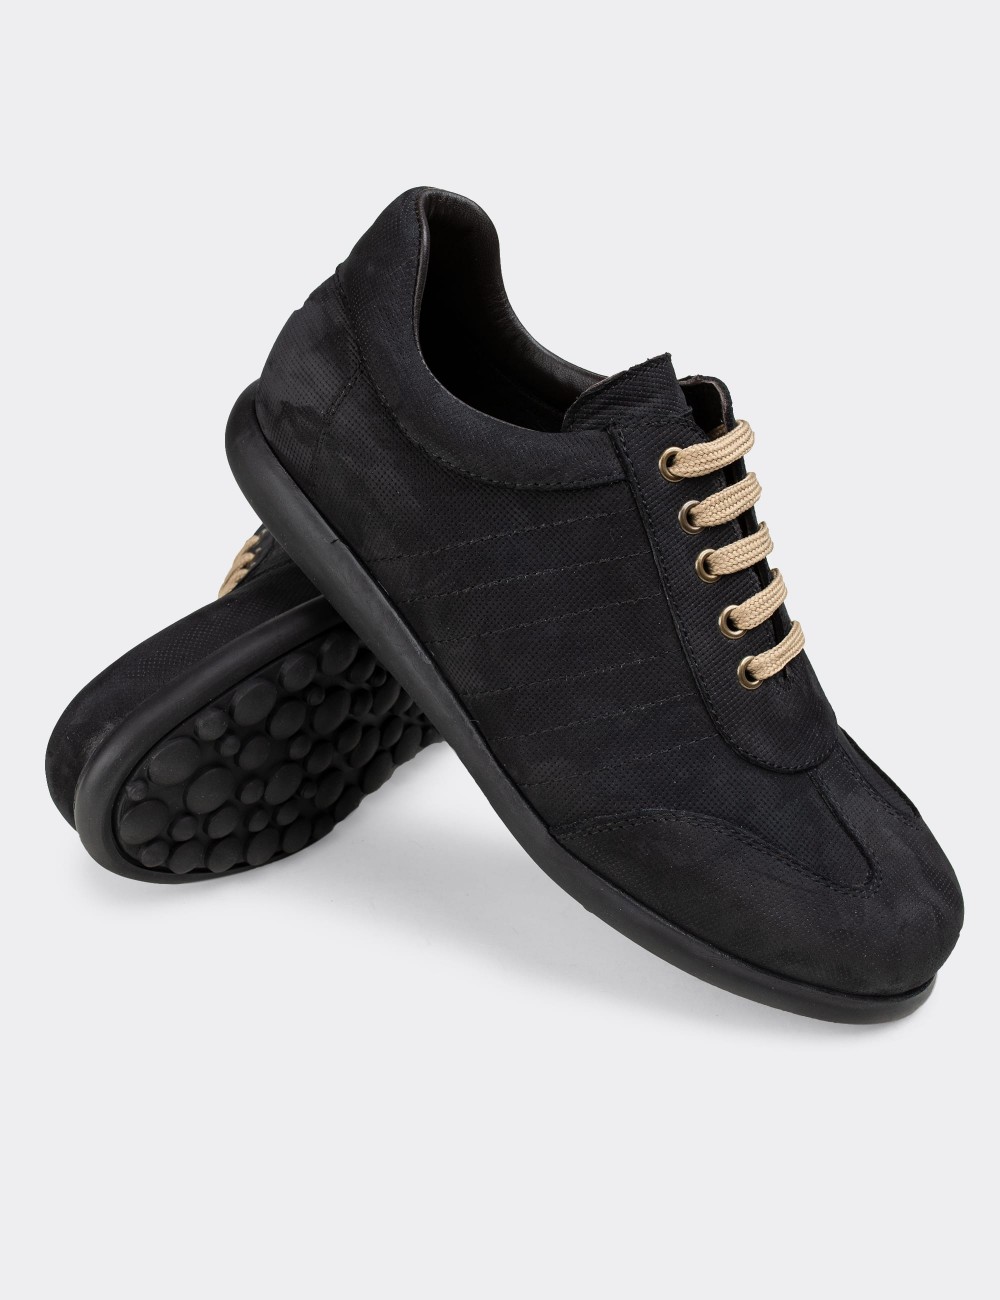 Navy Nubuck Leather Lace-up Shoes - 01826MLCVC04